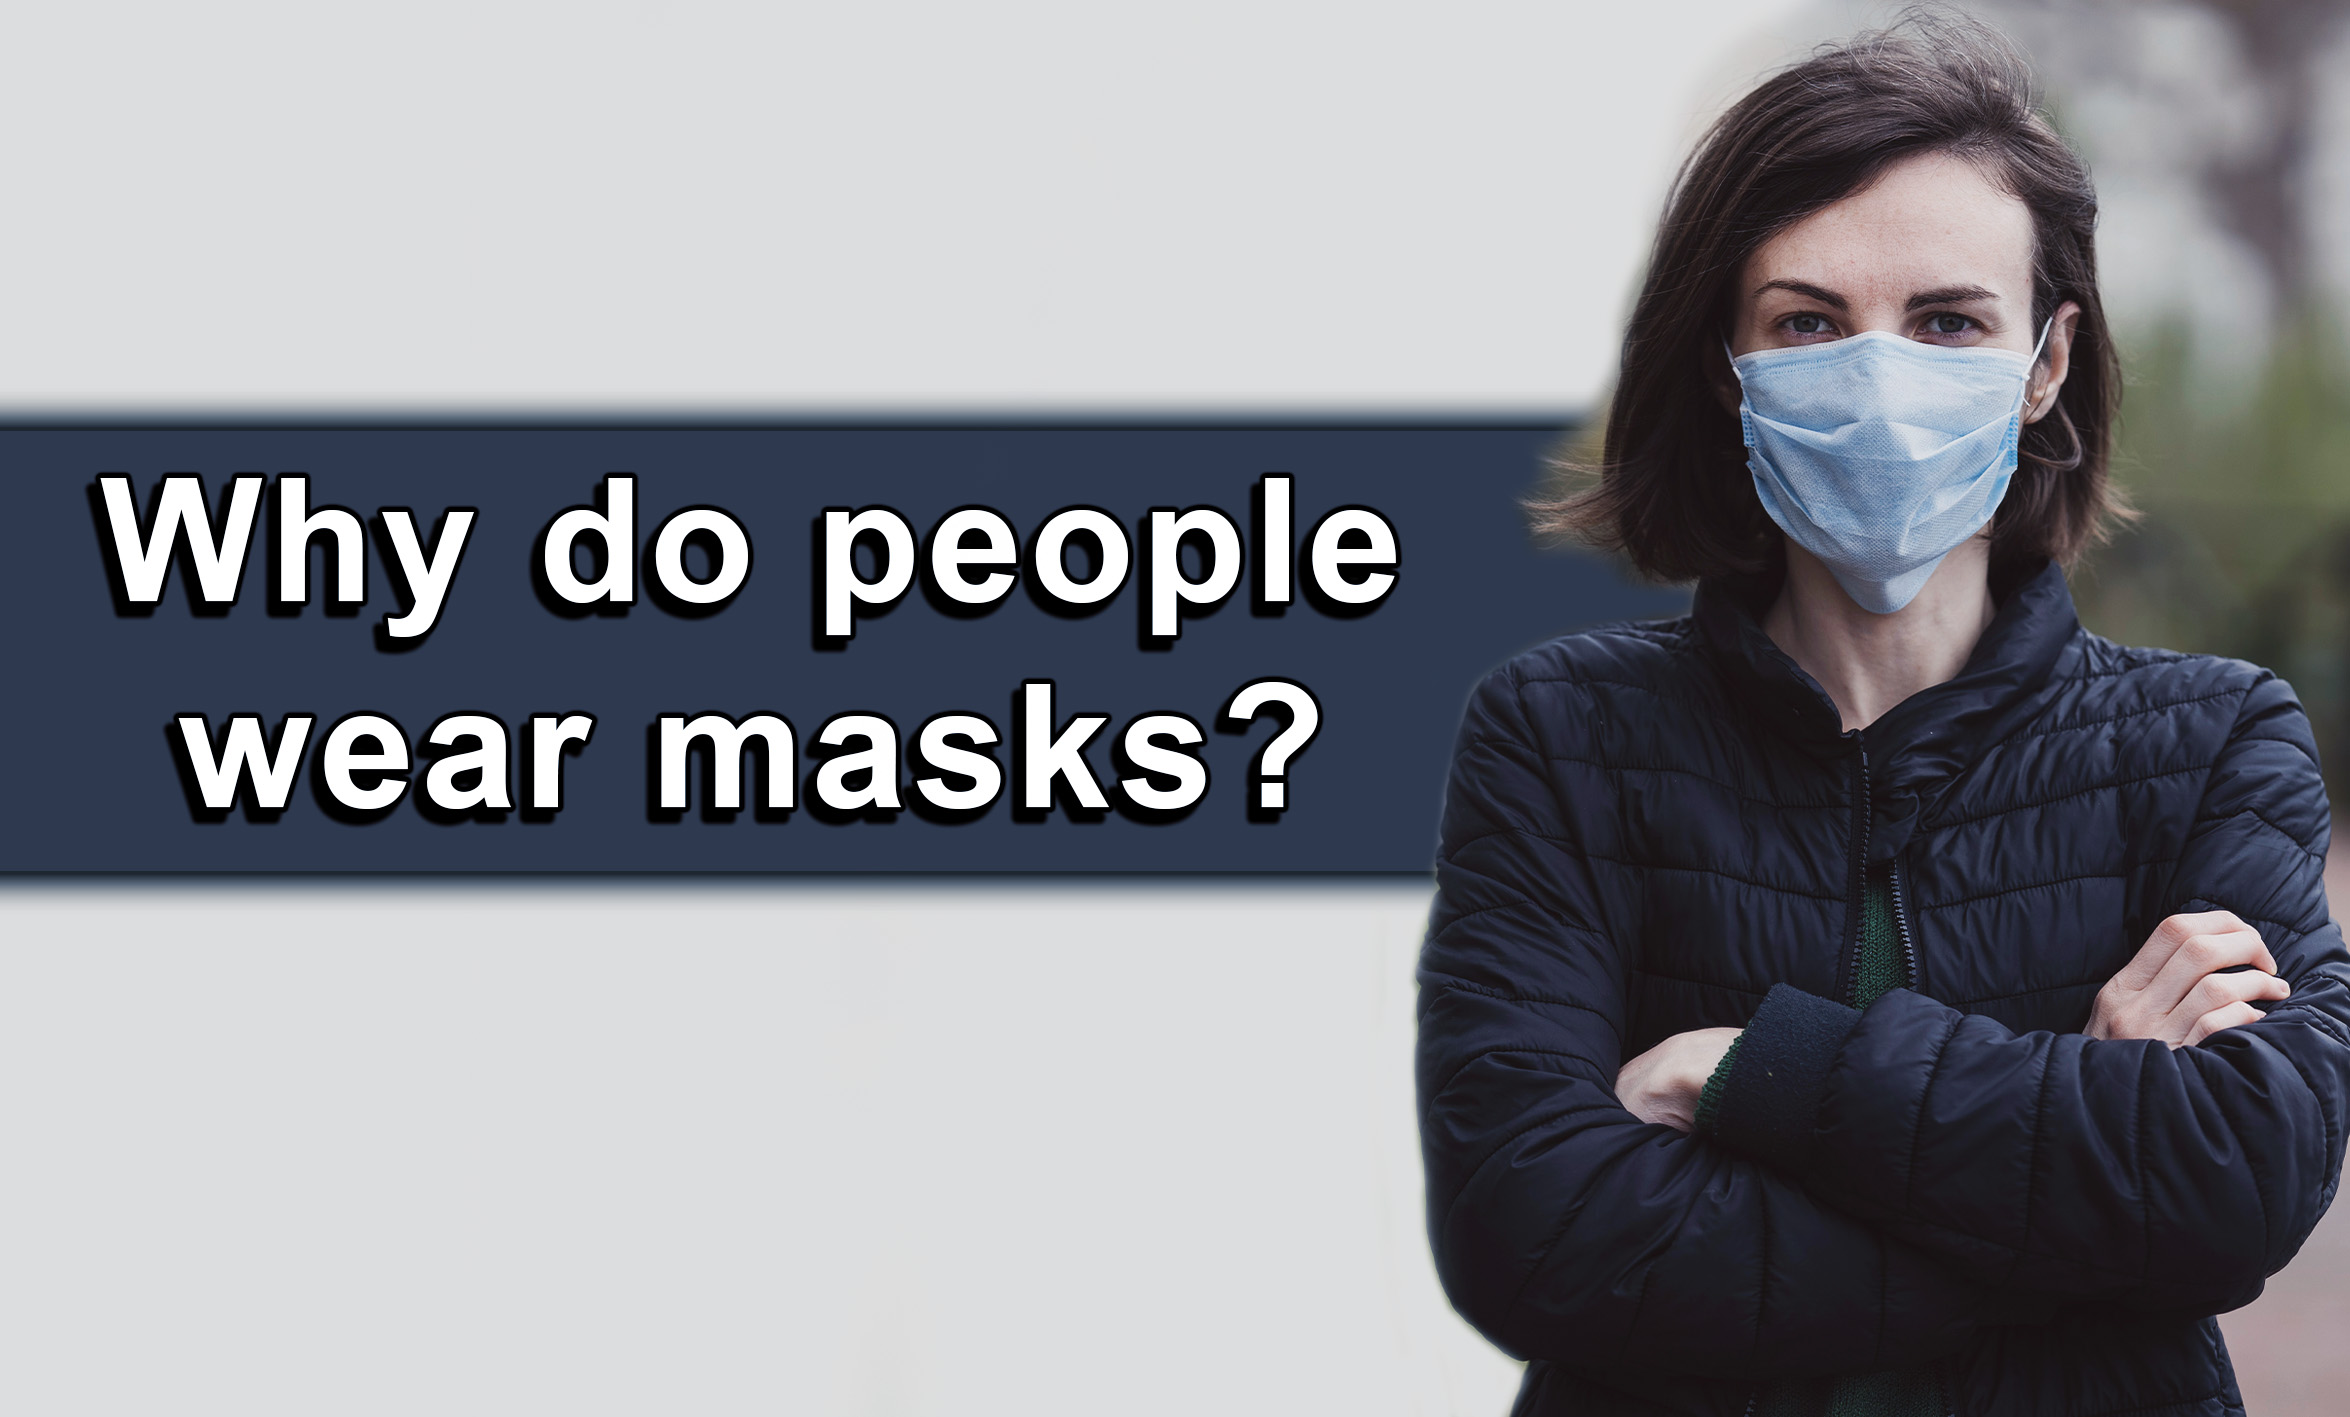 Why do people wear masks